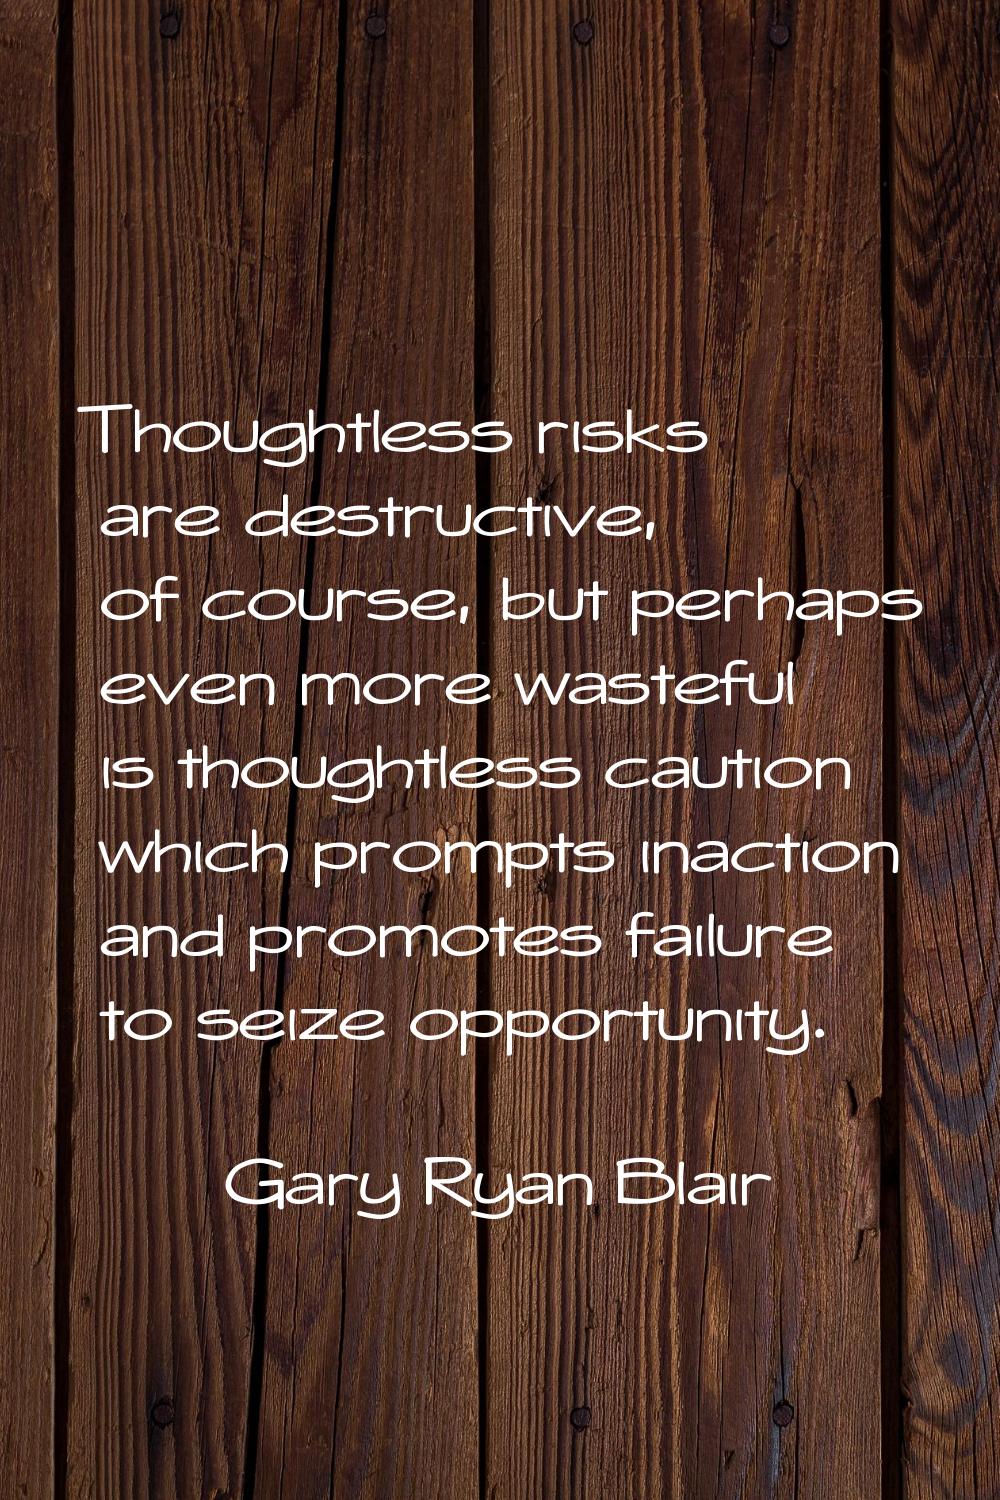 Thoughtless risks are destructive, of course, but perhaps even more wasteful is thoughtless caution